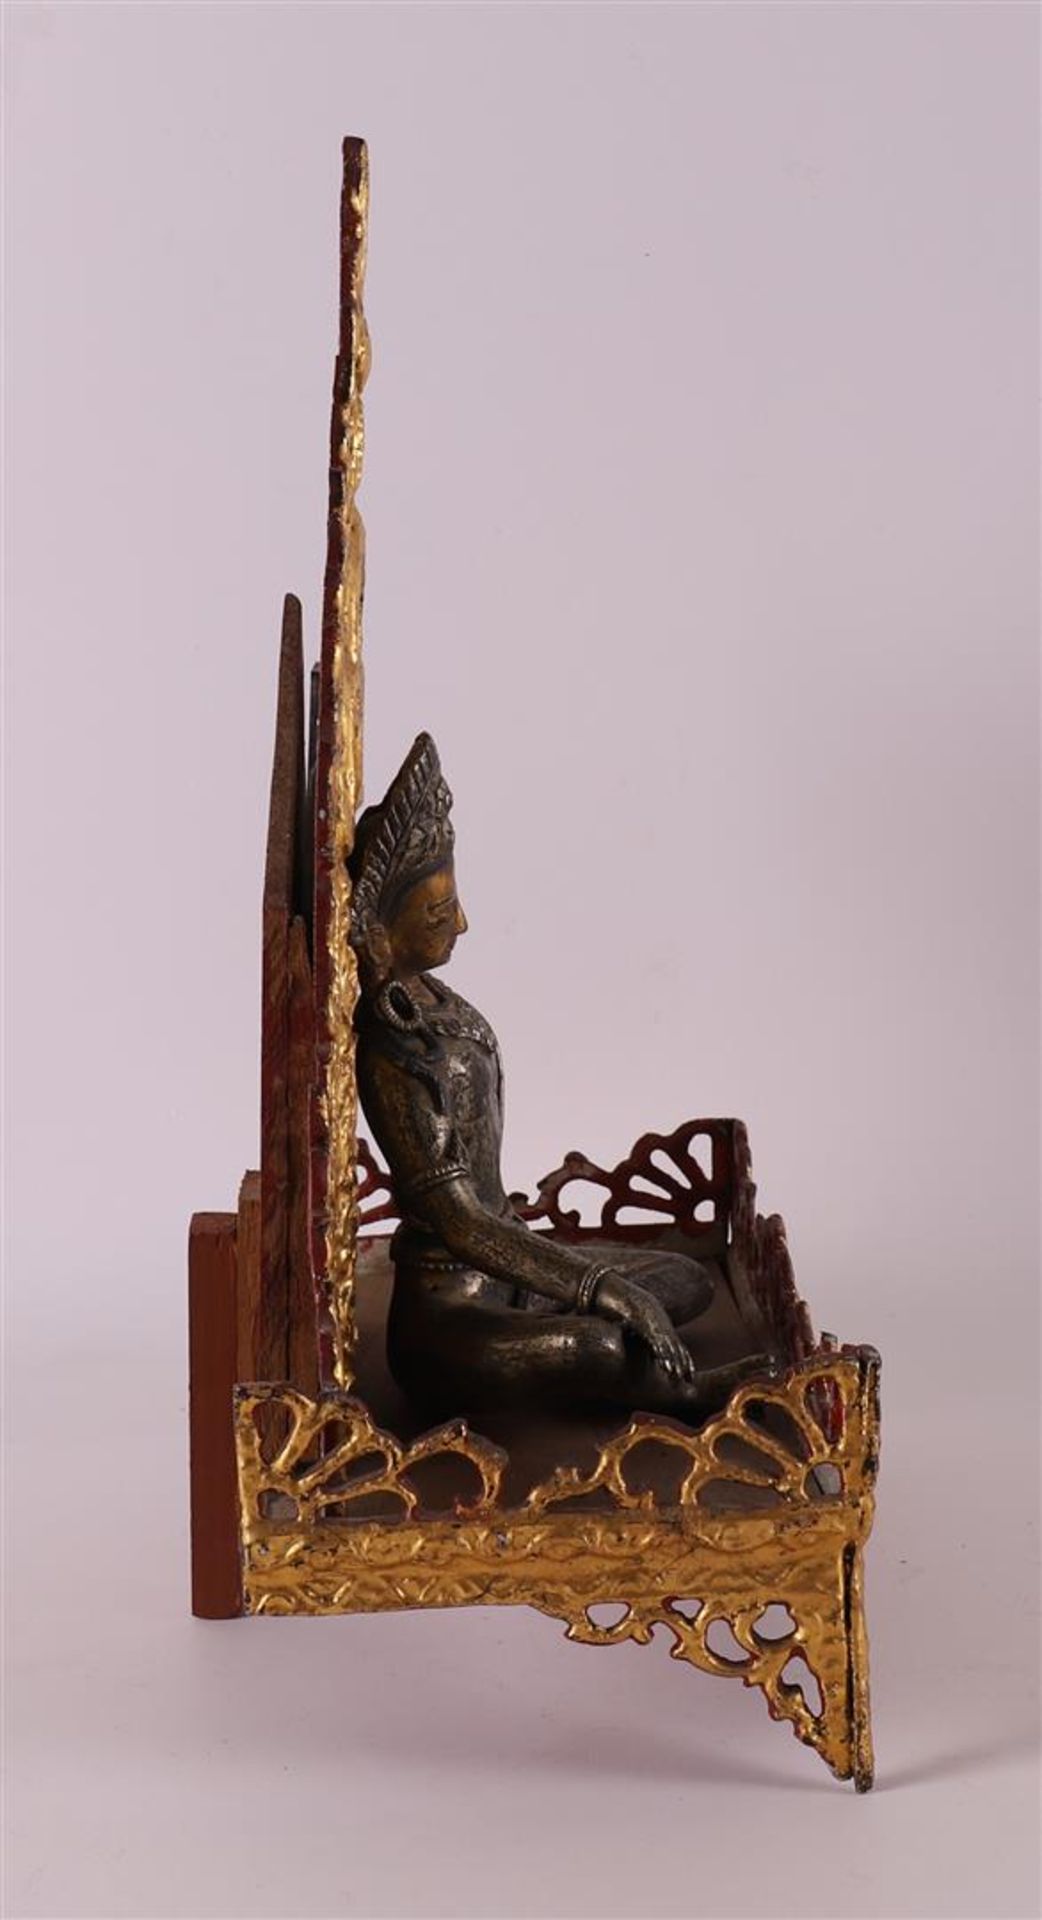 A silver-plated bronze Buddha on a loose gilded throne, India, 19th/20th century - Image 5 of 5